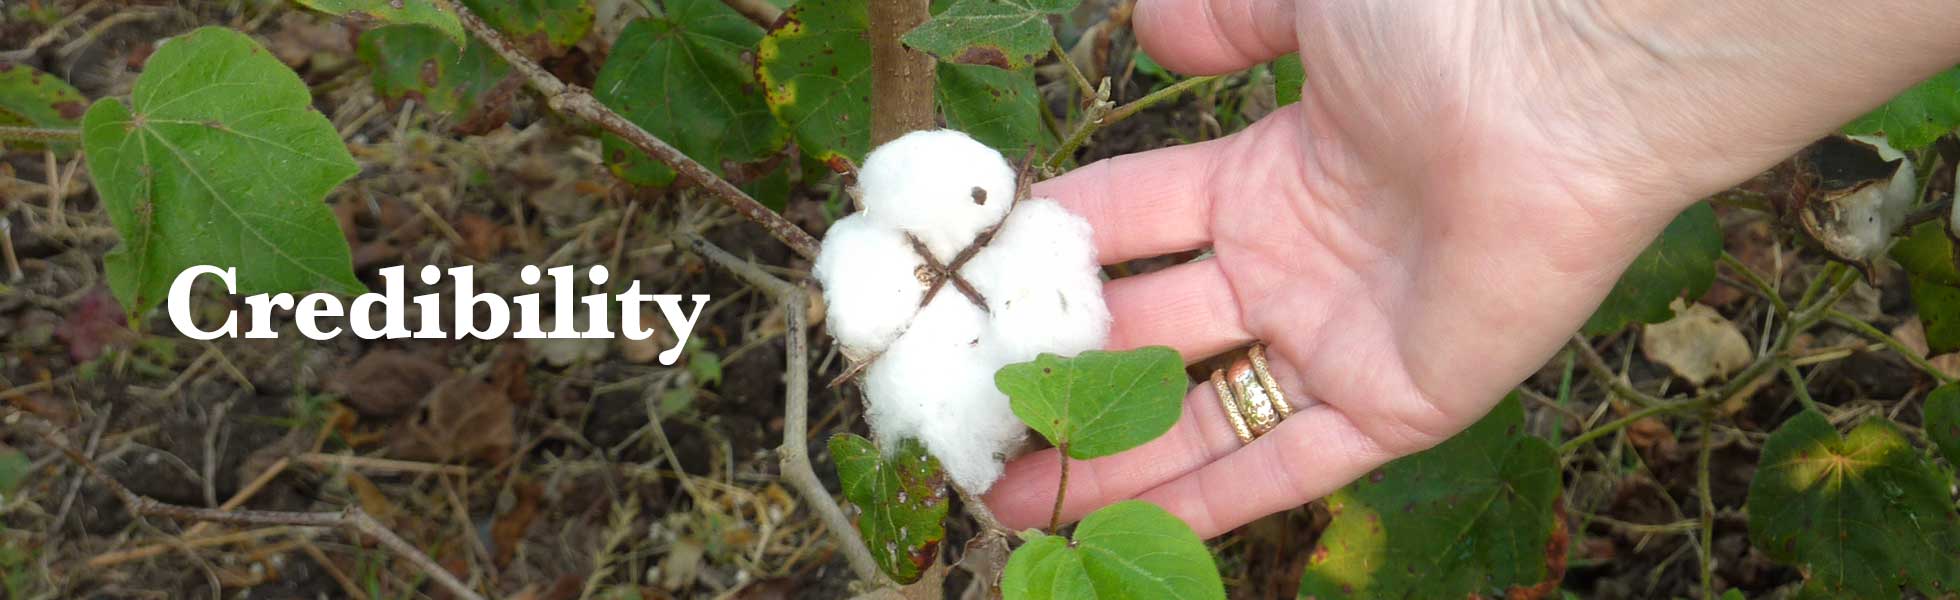 A person with a gold ring holding a growing cotton plant. The text next to them reads: Credibility.